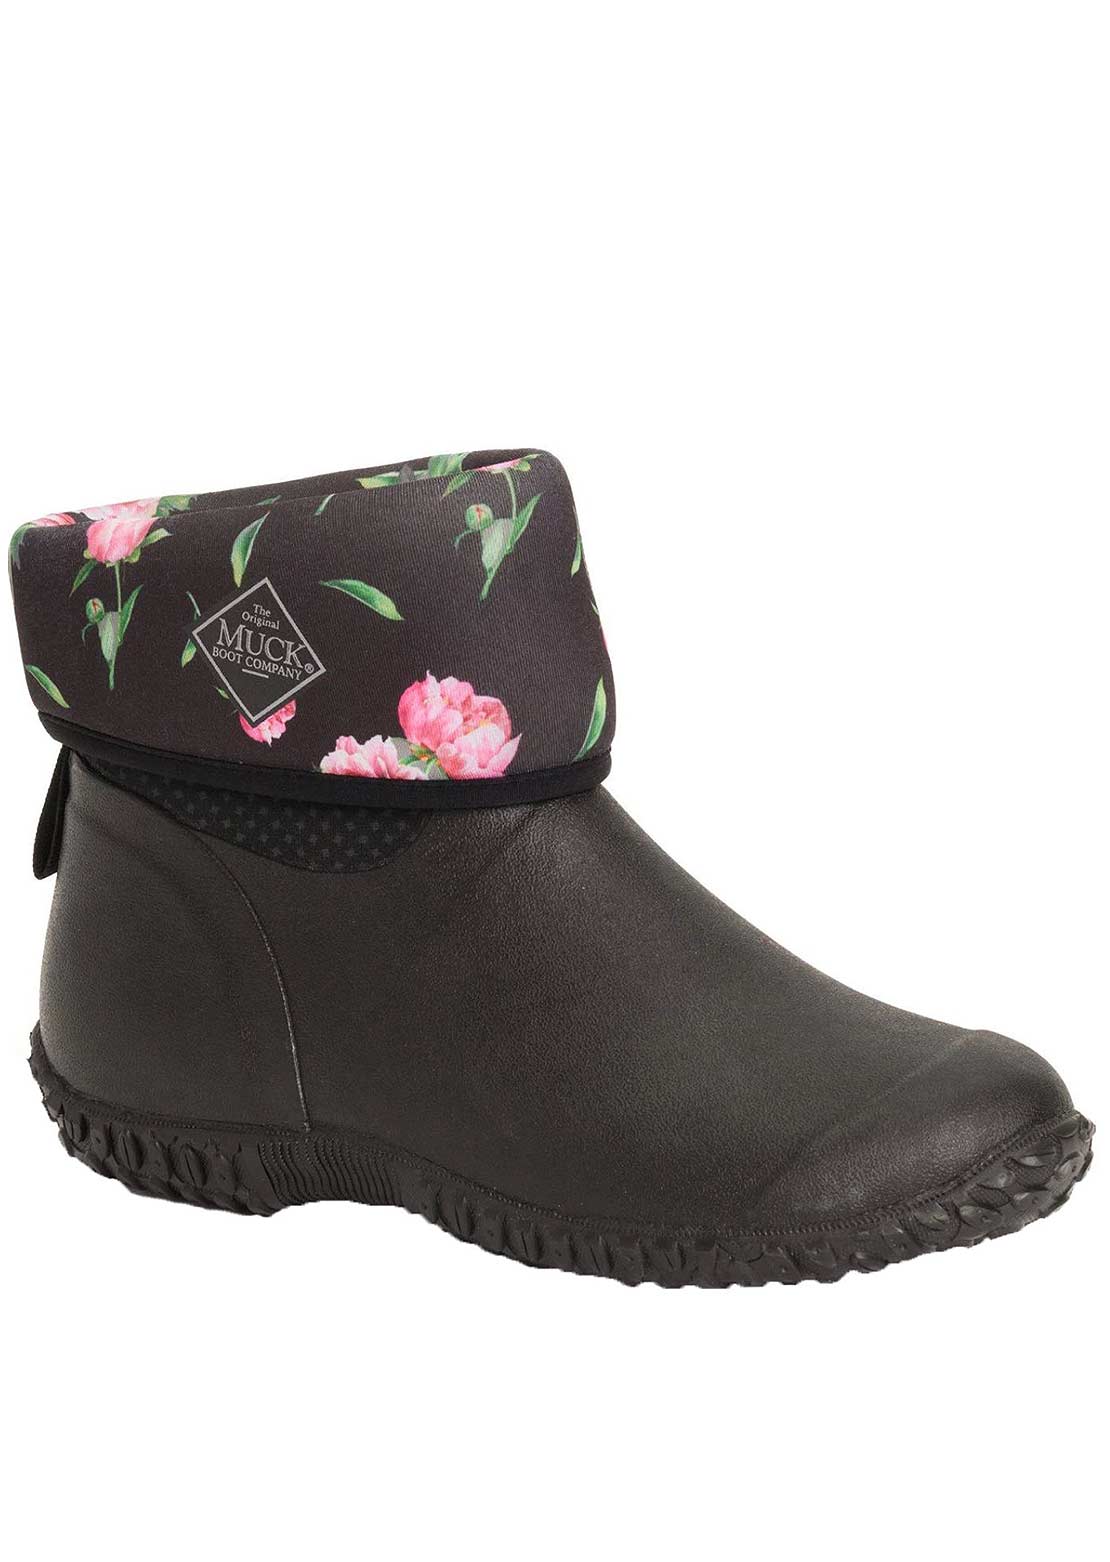 Muck Boot Co. Women&#39;s Muckster II Mid Boots Black/Charcoal/Rose Print